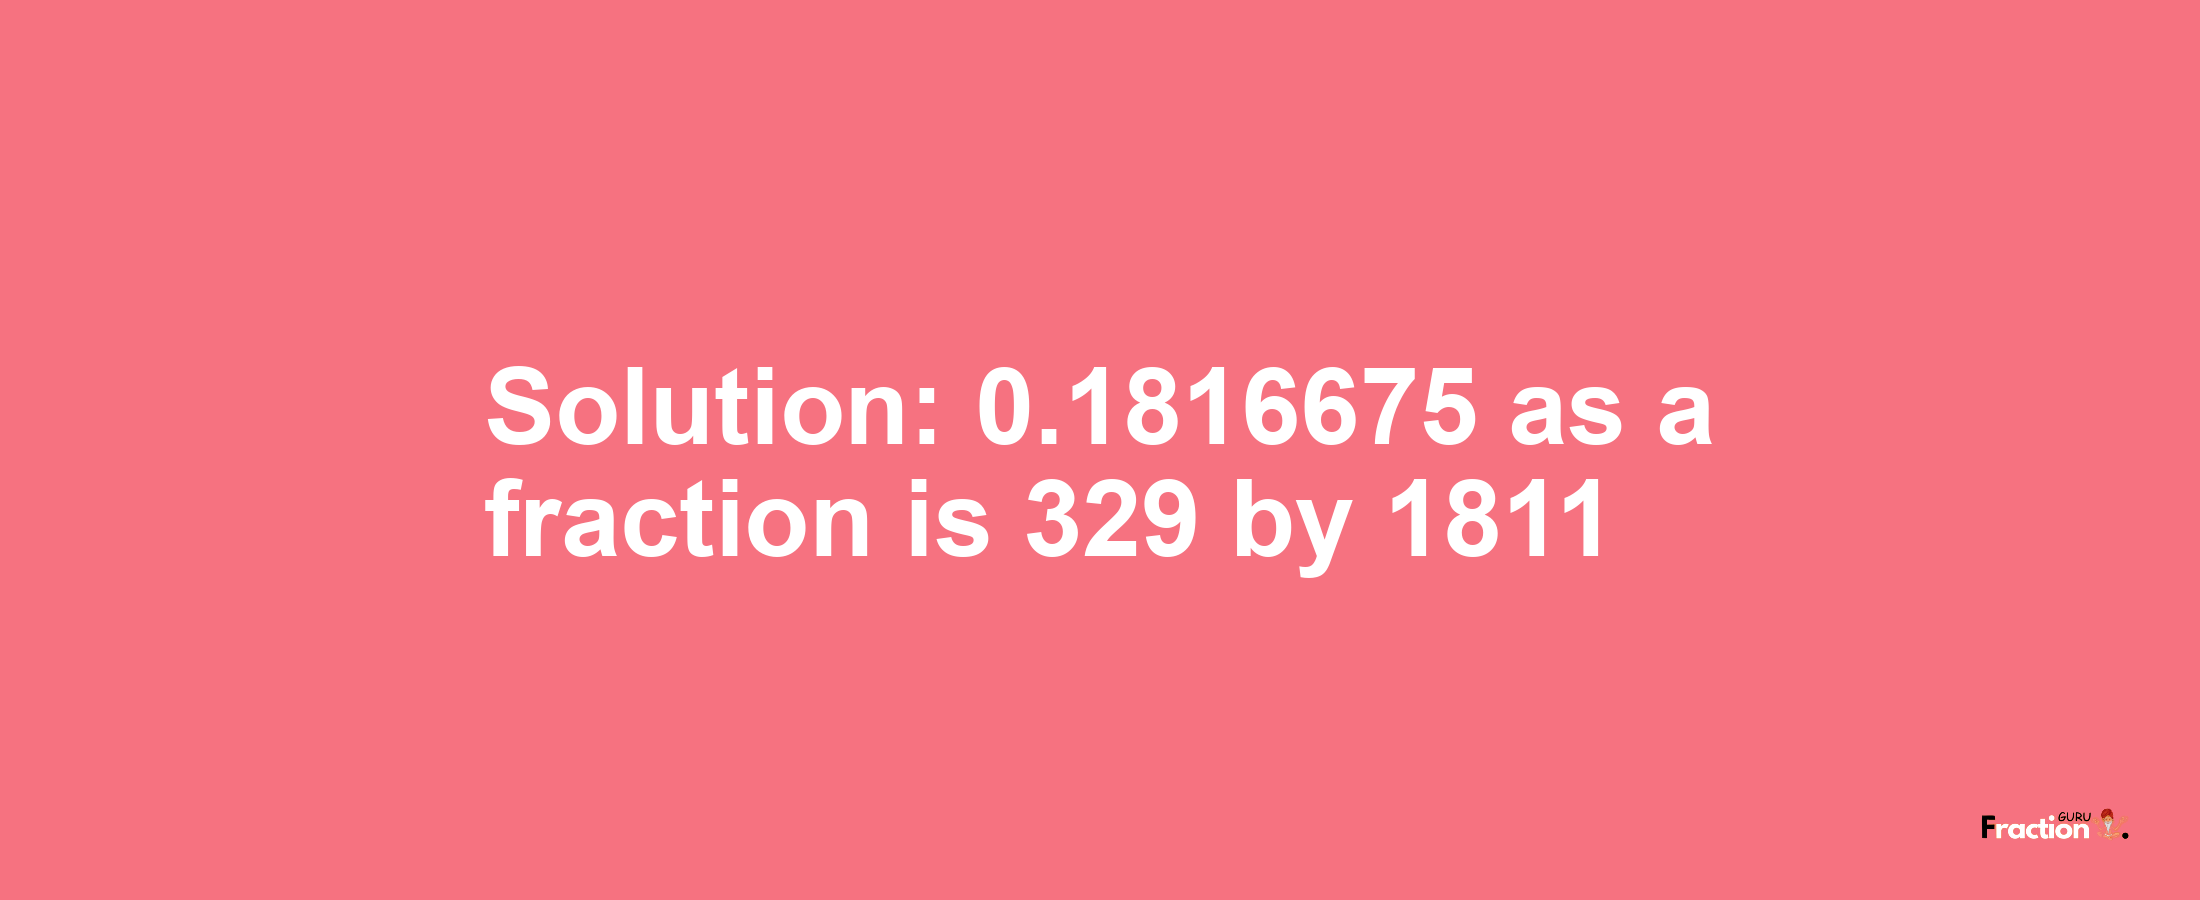 Solution:0.1816675 as a fraction is 329/1811